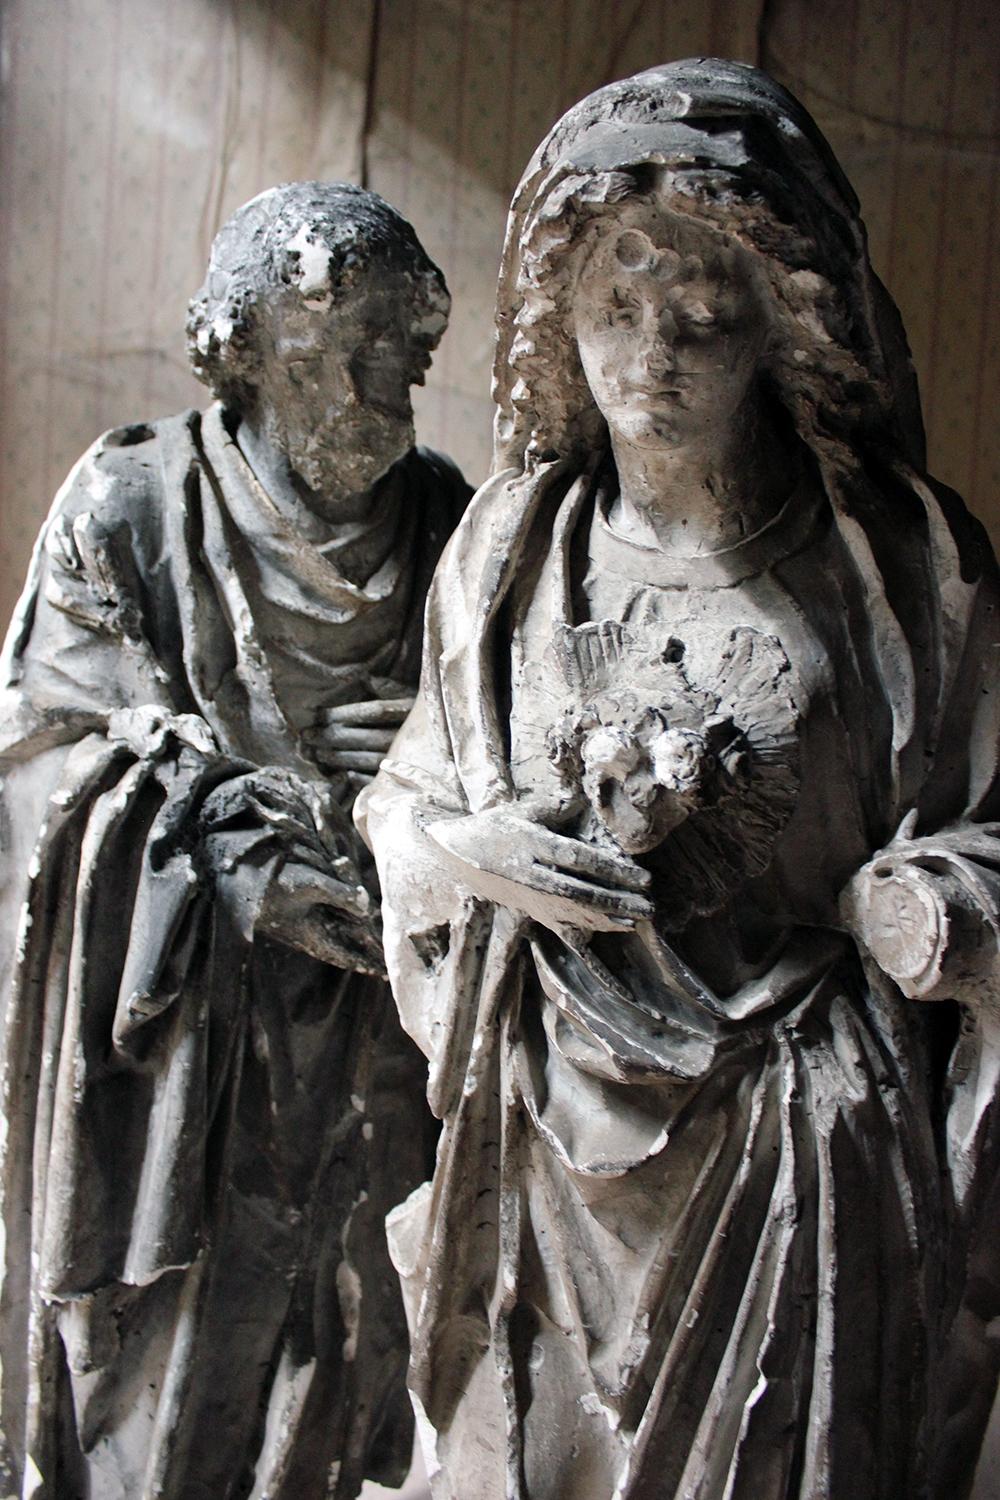 Two Ecclesiastical Plaster Figures of the Immaculate Heart of Mary & St. David 4